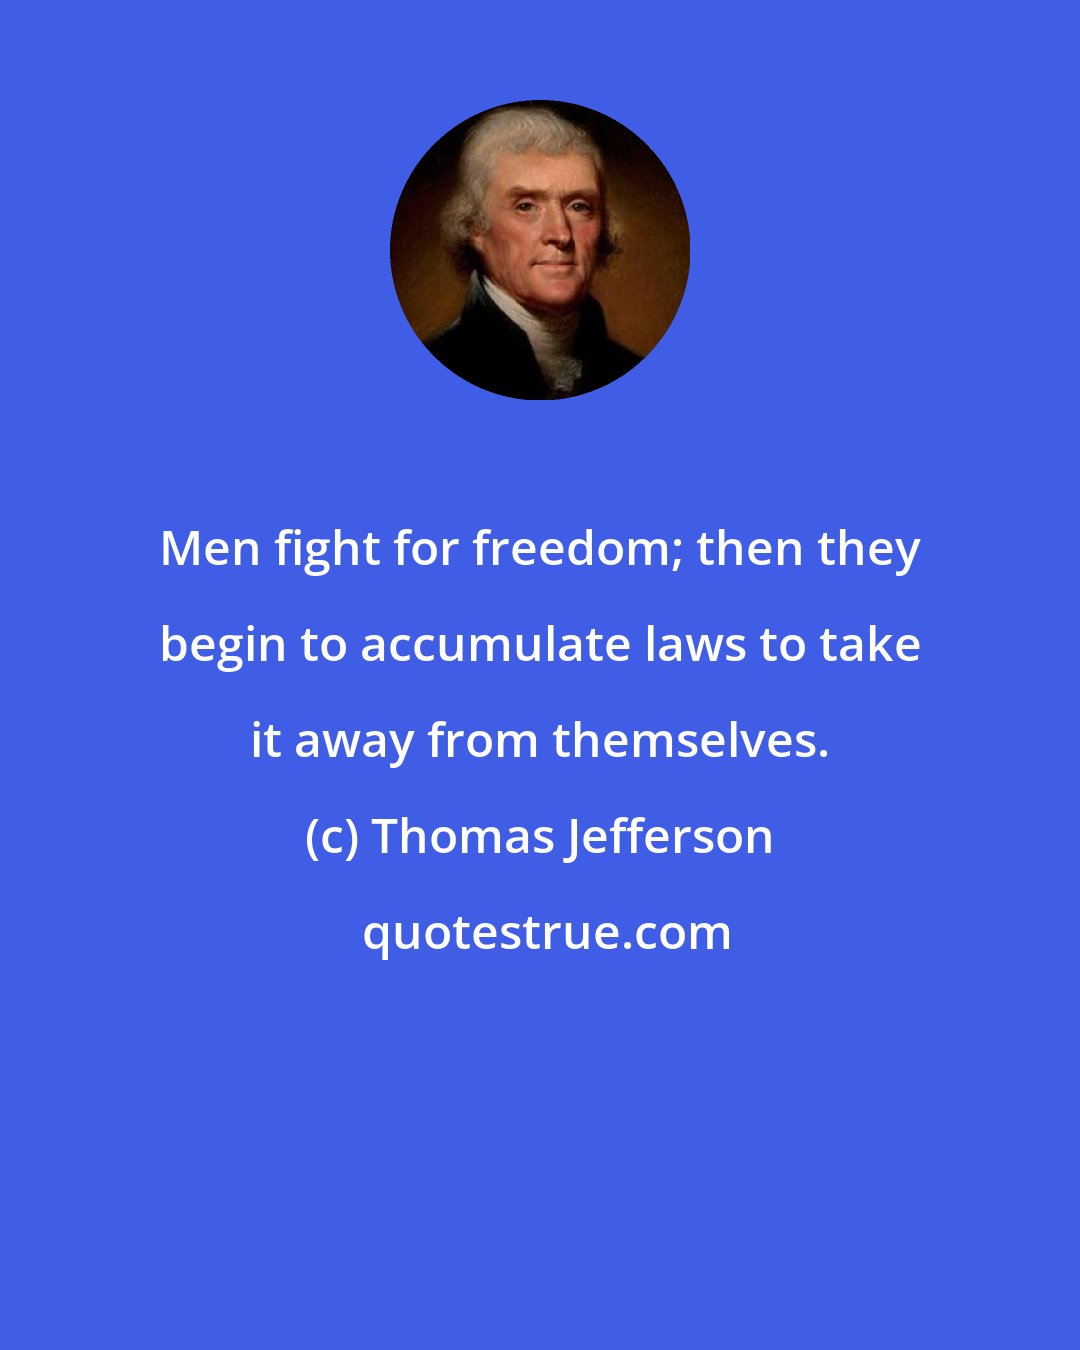 Thomas Jefferson: Men fight for freedom; then they begin to accumulate laws to take it away from themselves.